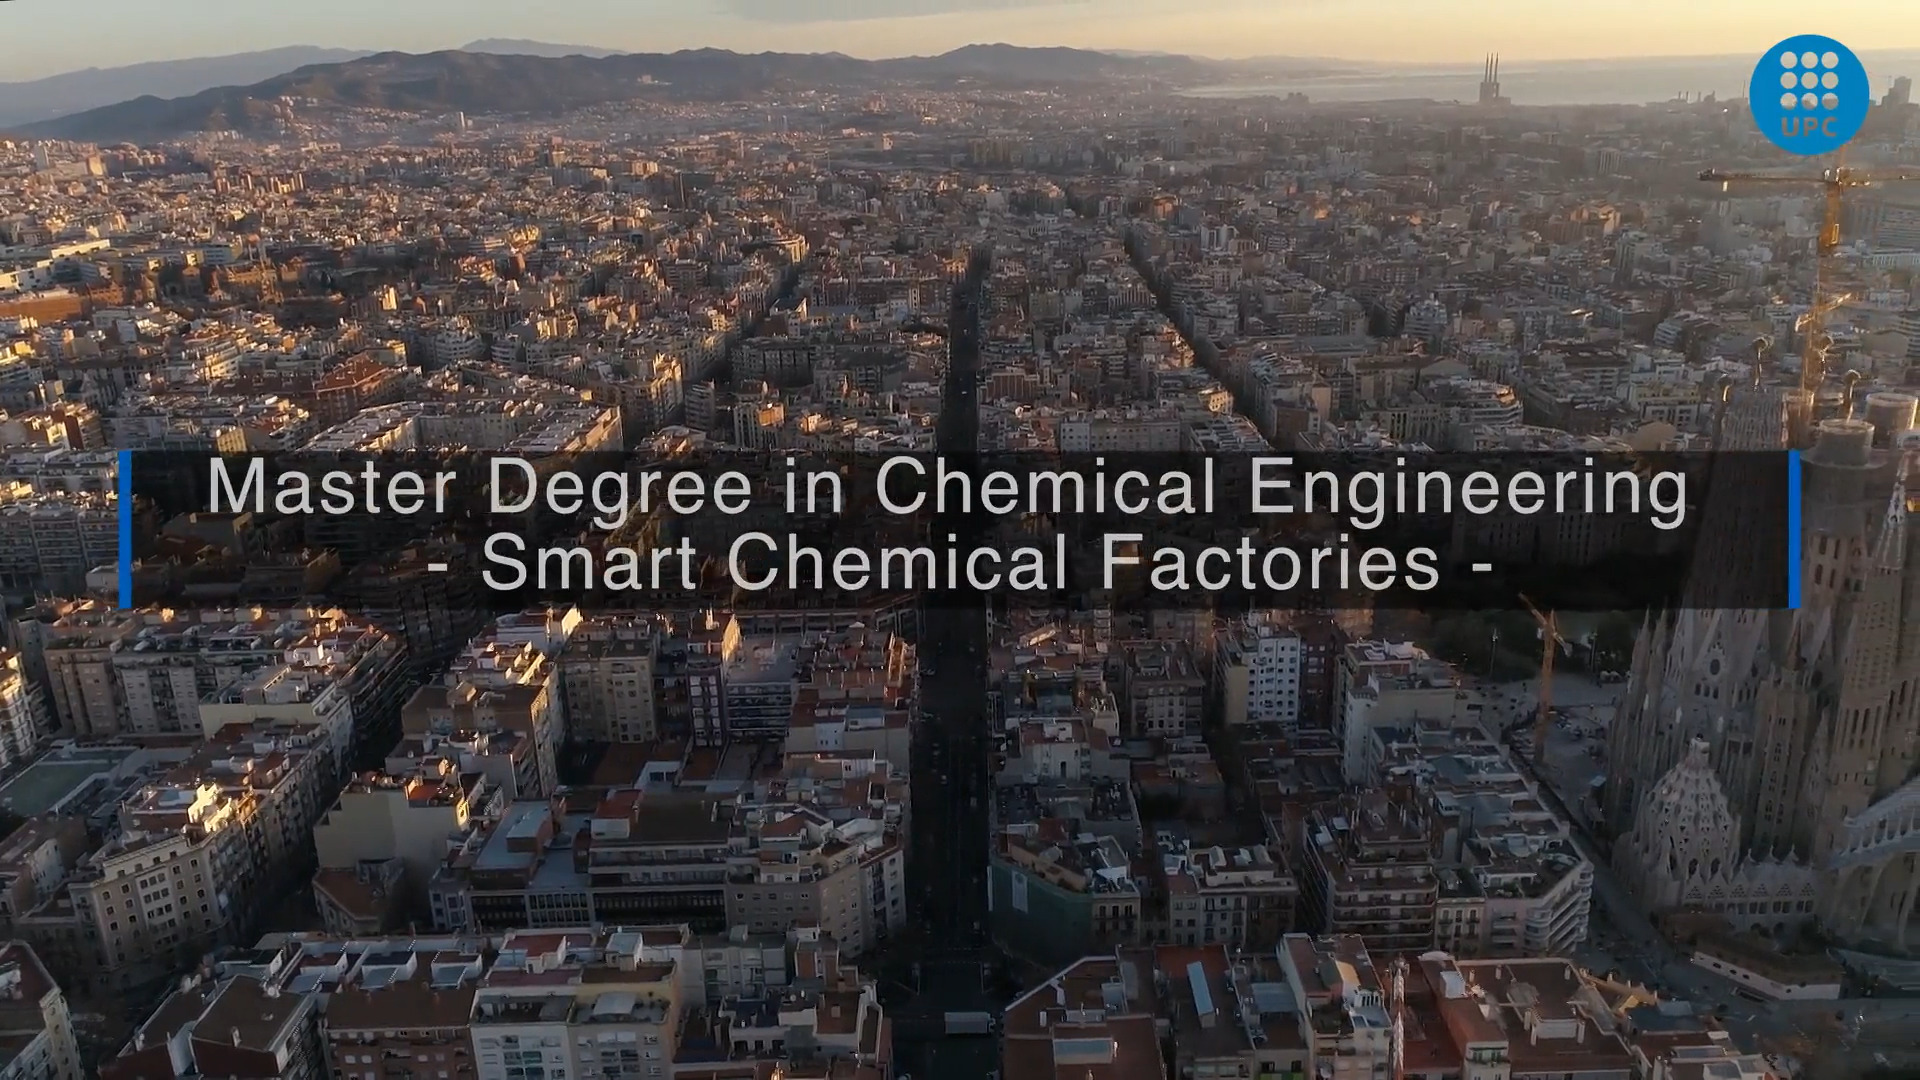 Master's degree in Chemical Engineering